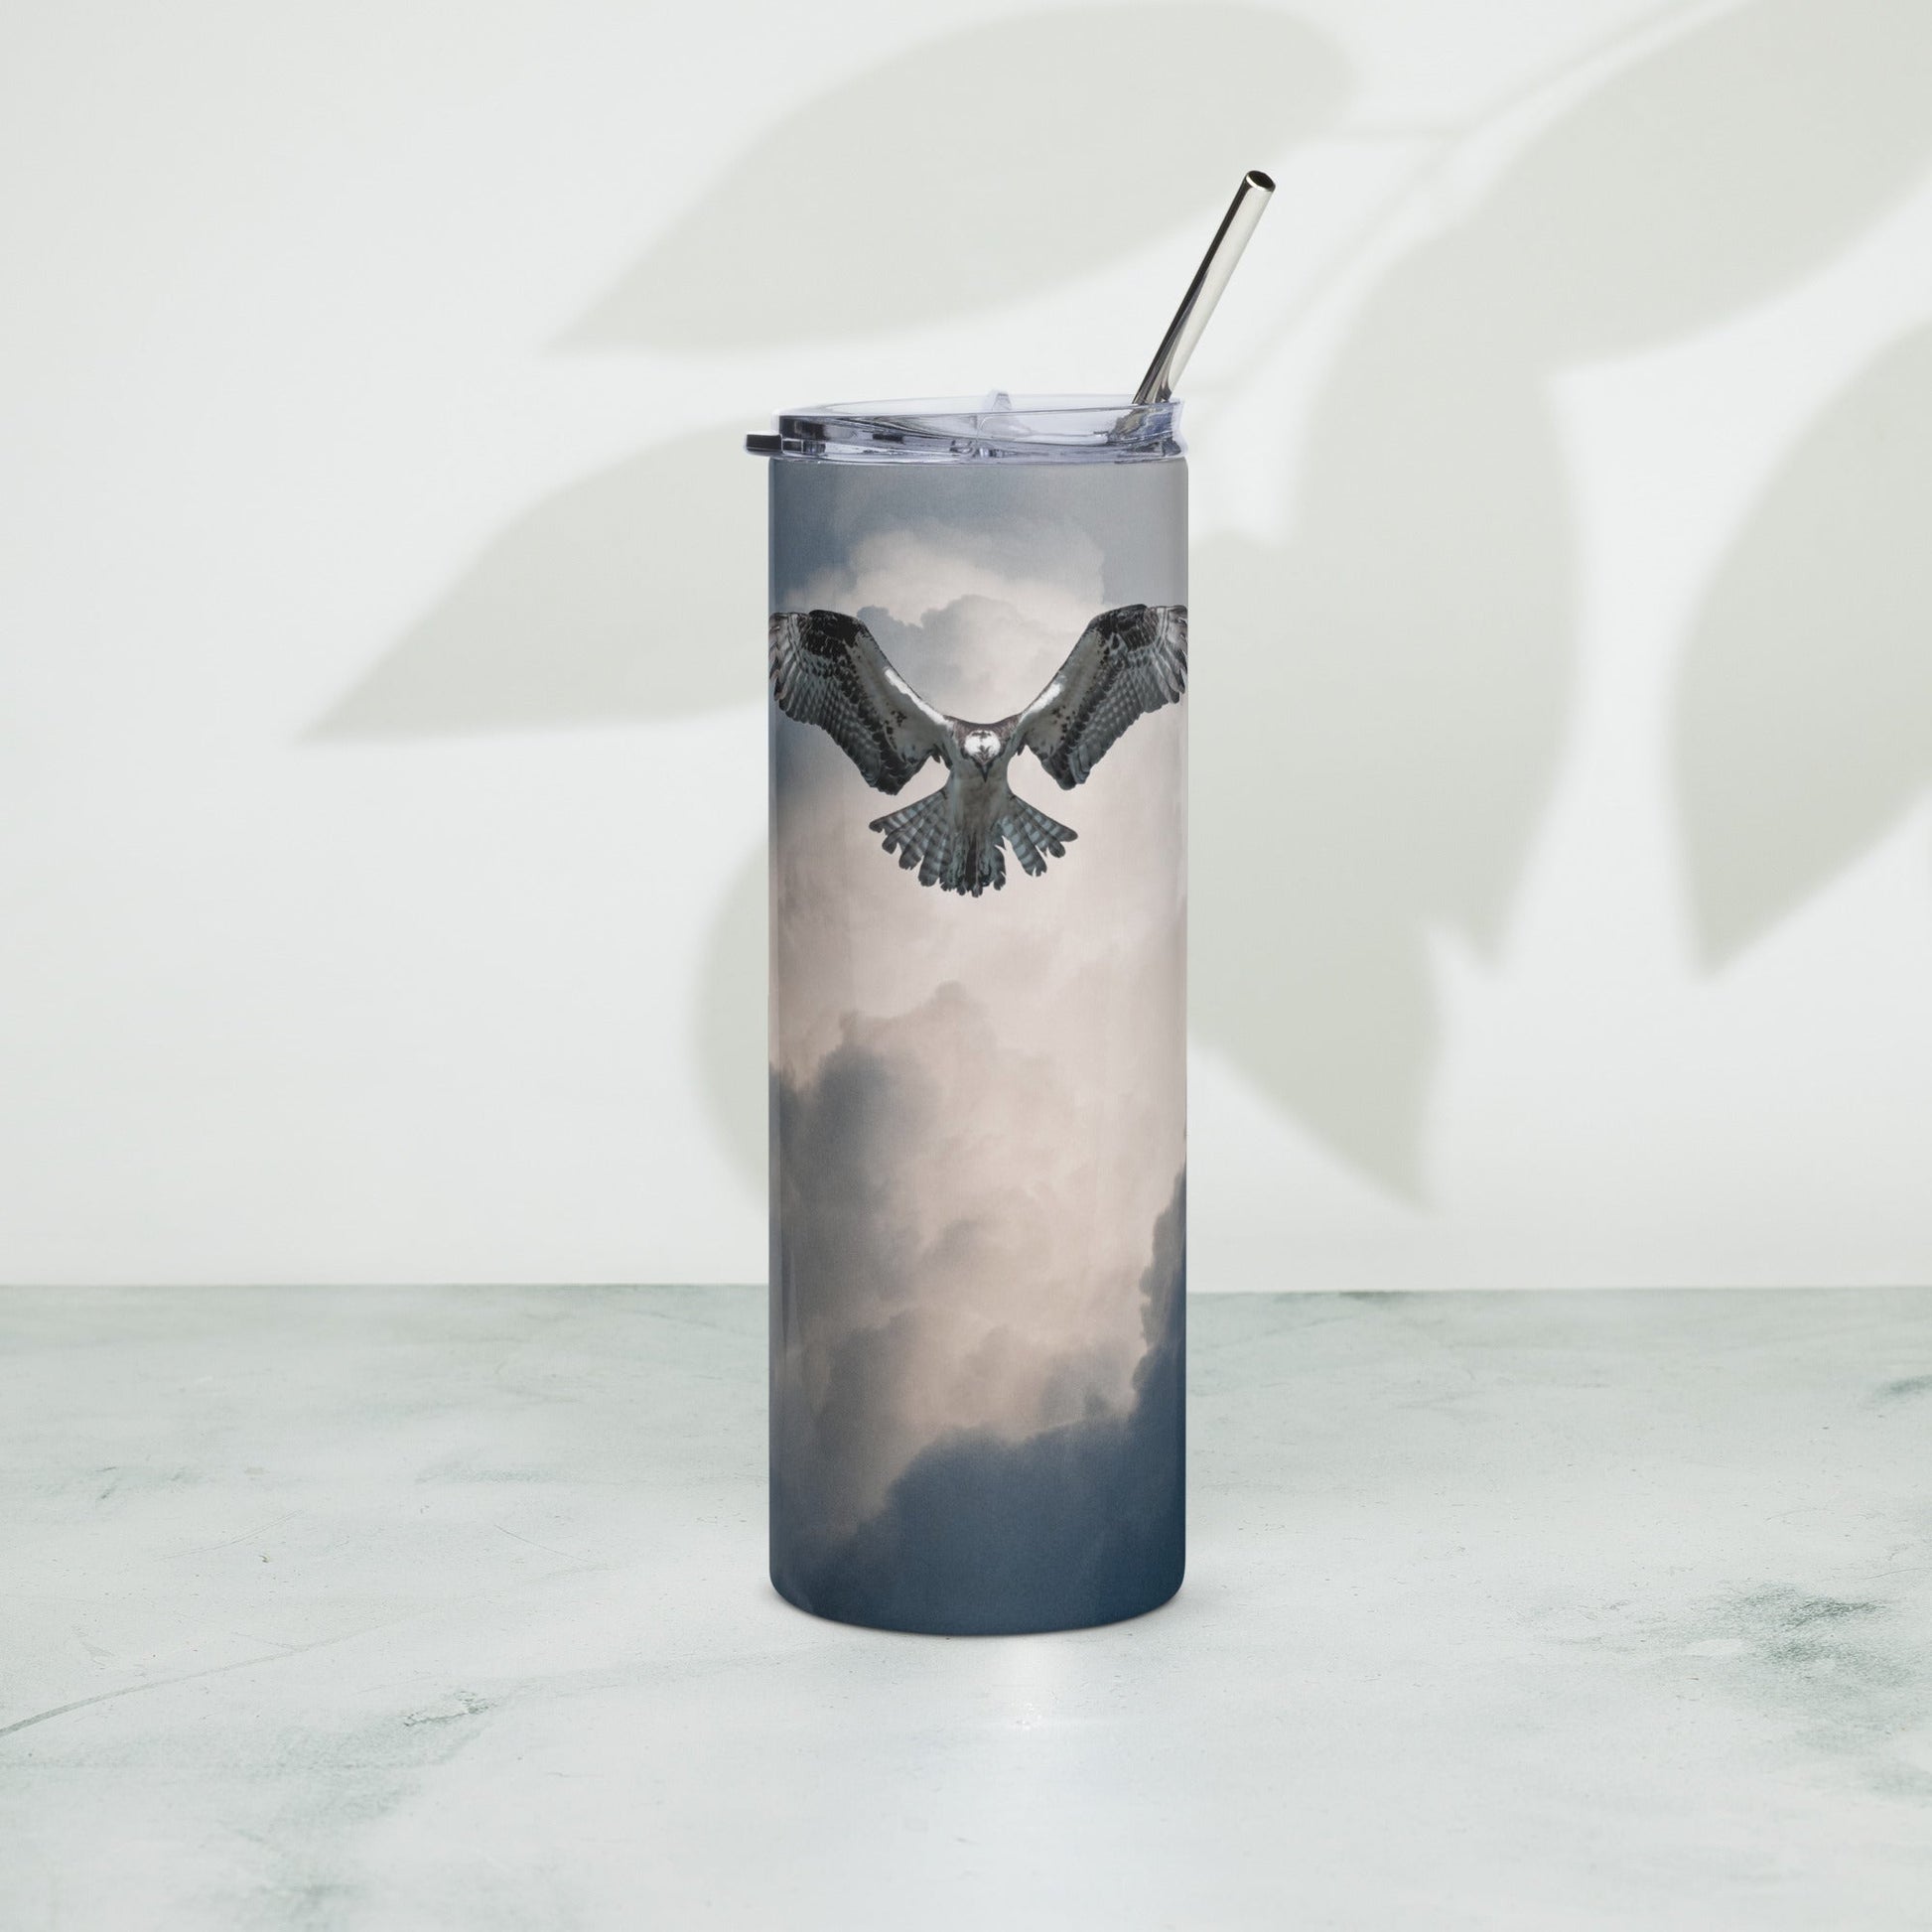 Osprey Stainless Steel Tumbler - Perfect gift for any birdwatcher